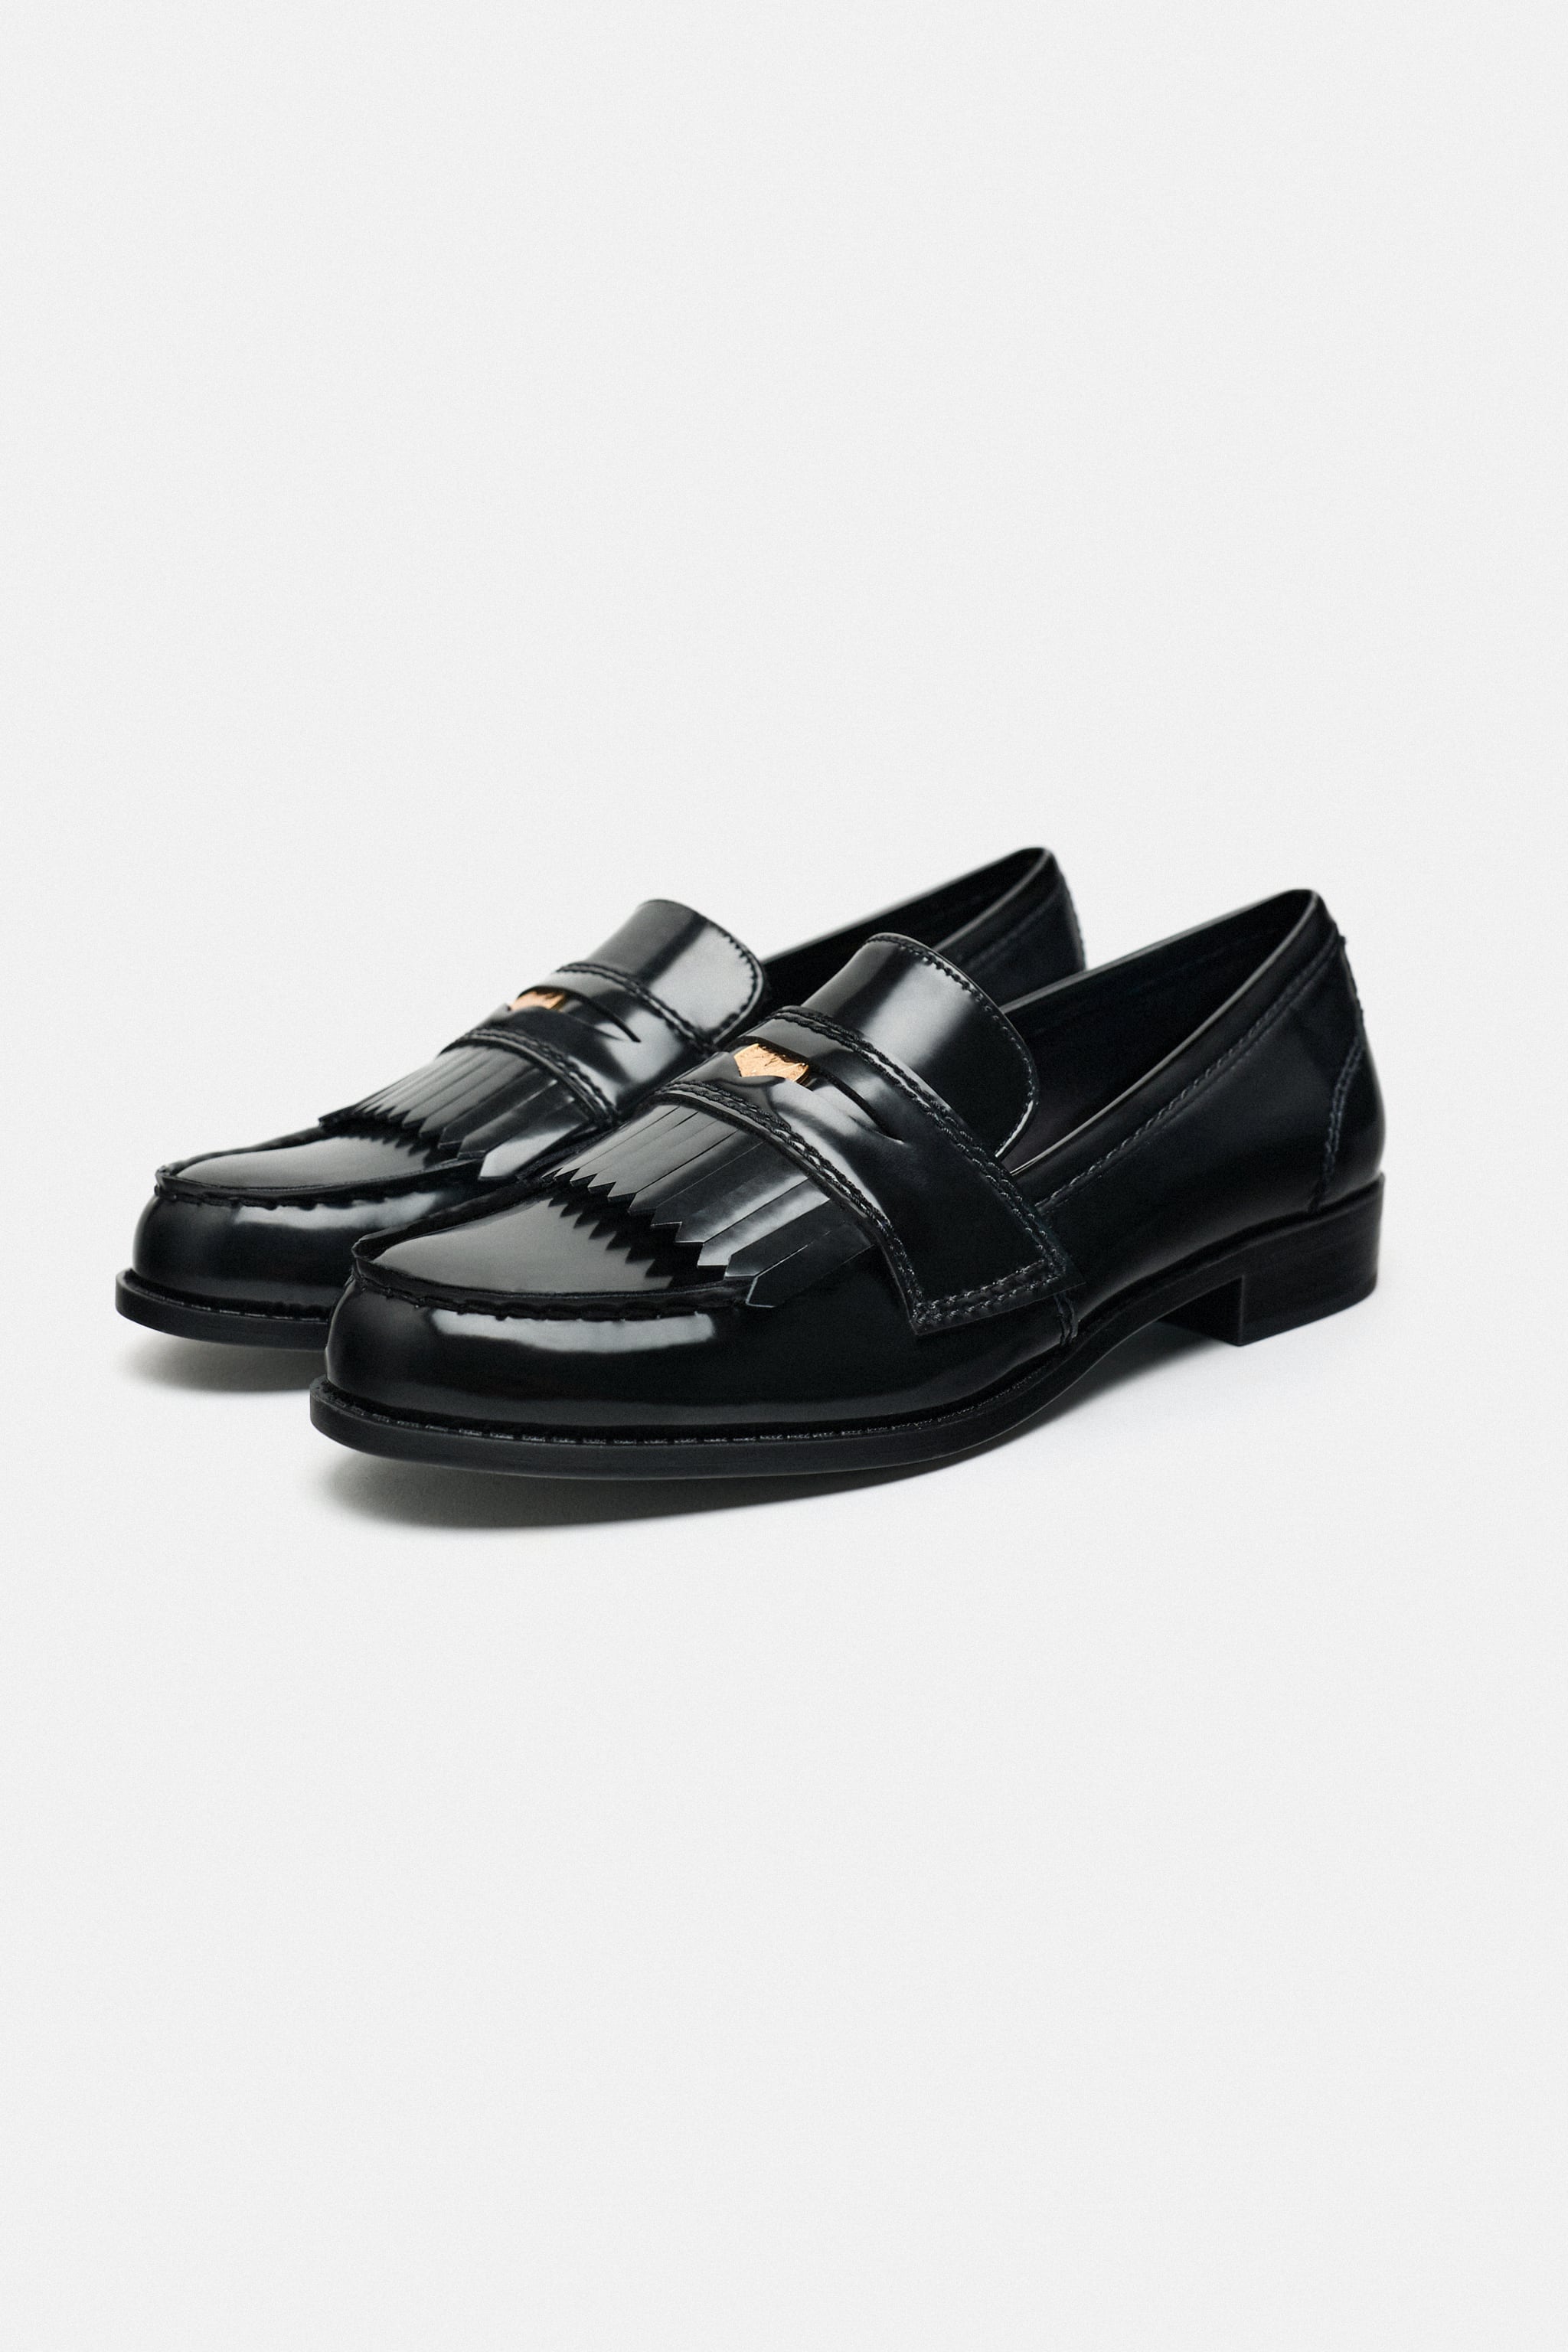 Zara + Flat Loafers with Metal Ingredient